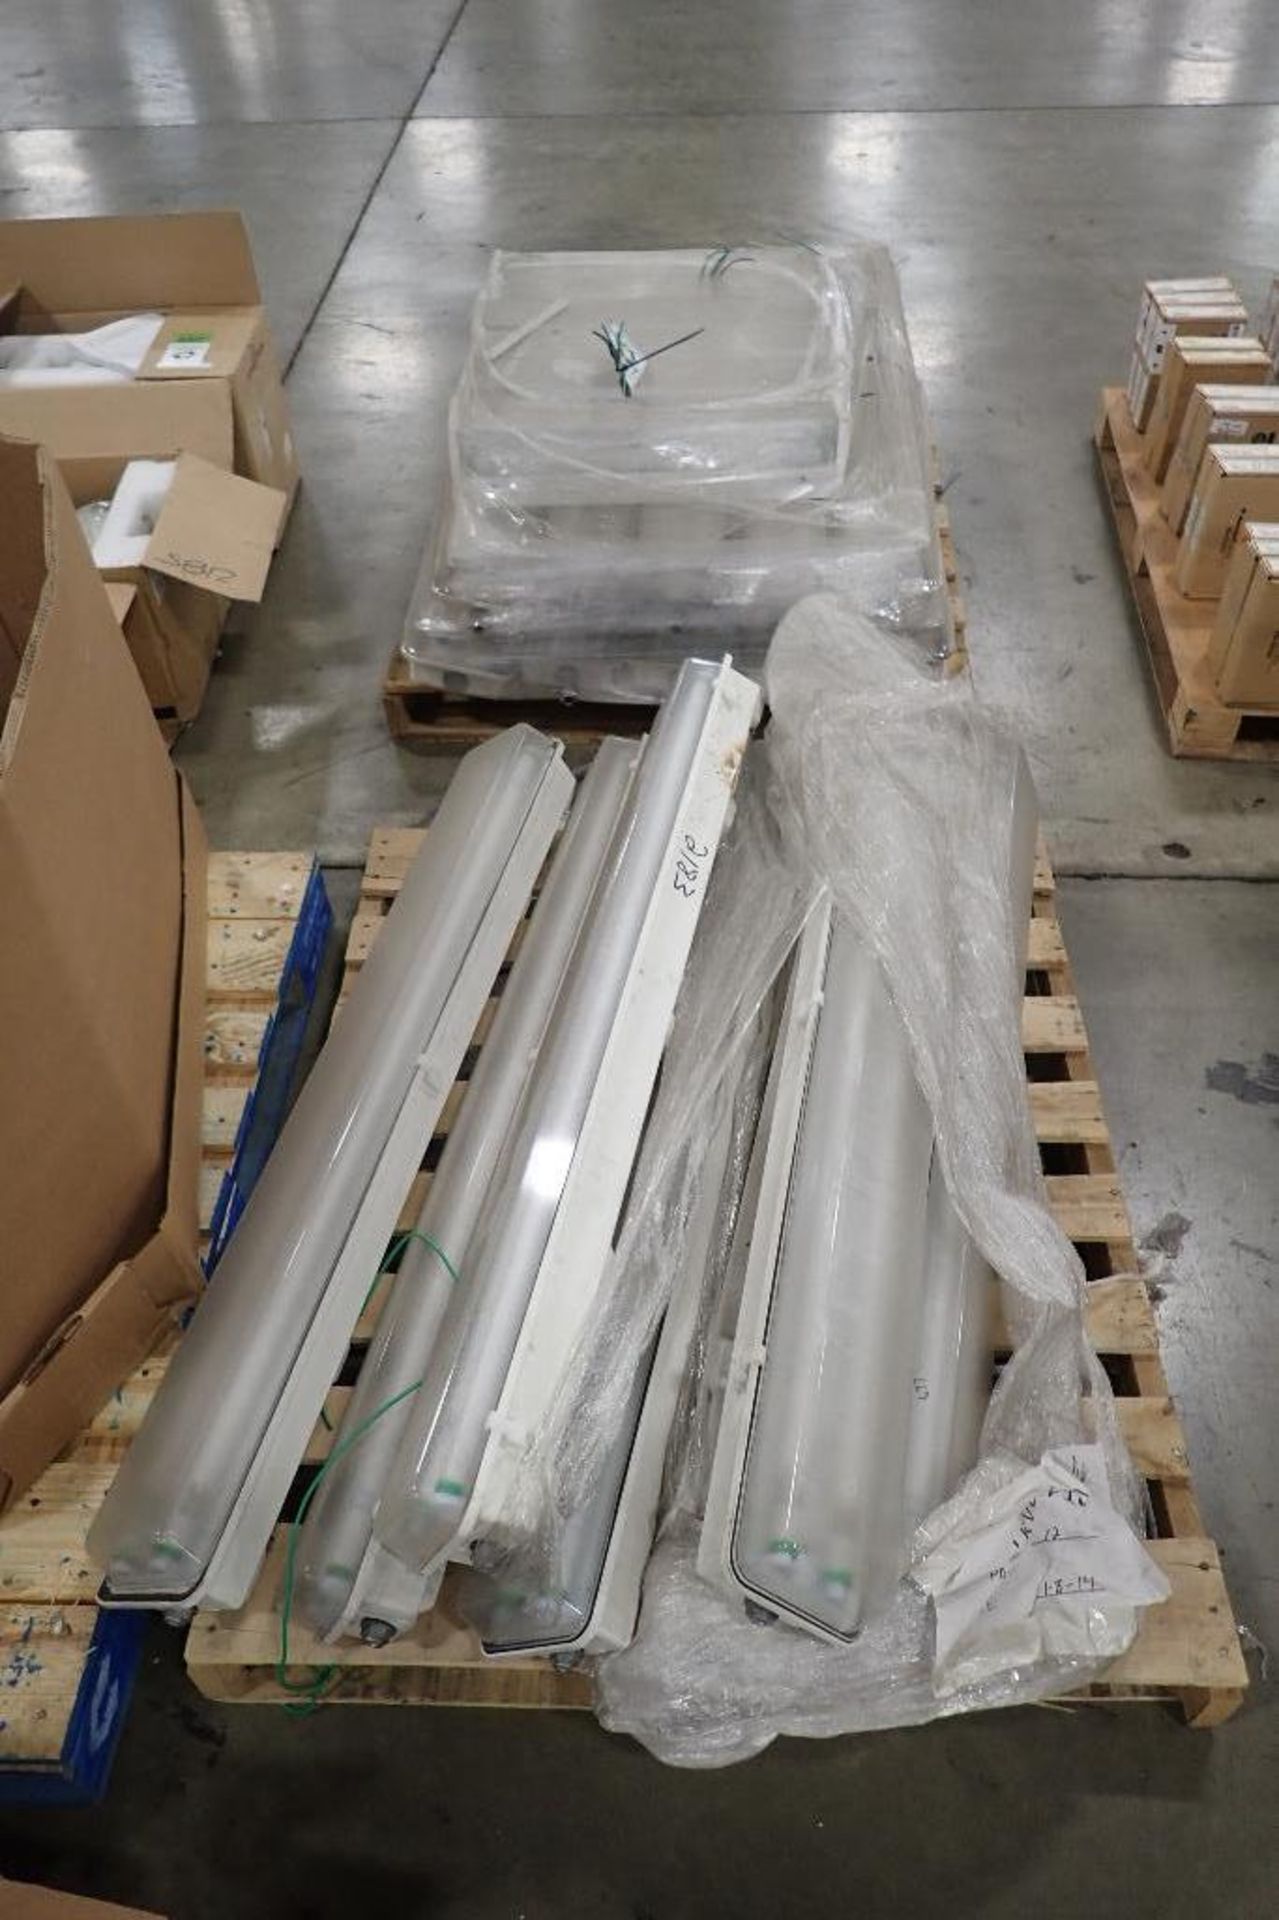 (18) 50 in dual tube fluorescent lights, (6) 30 in double tube fluorescent lights. (See photos for a